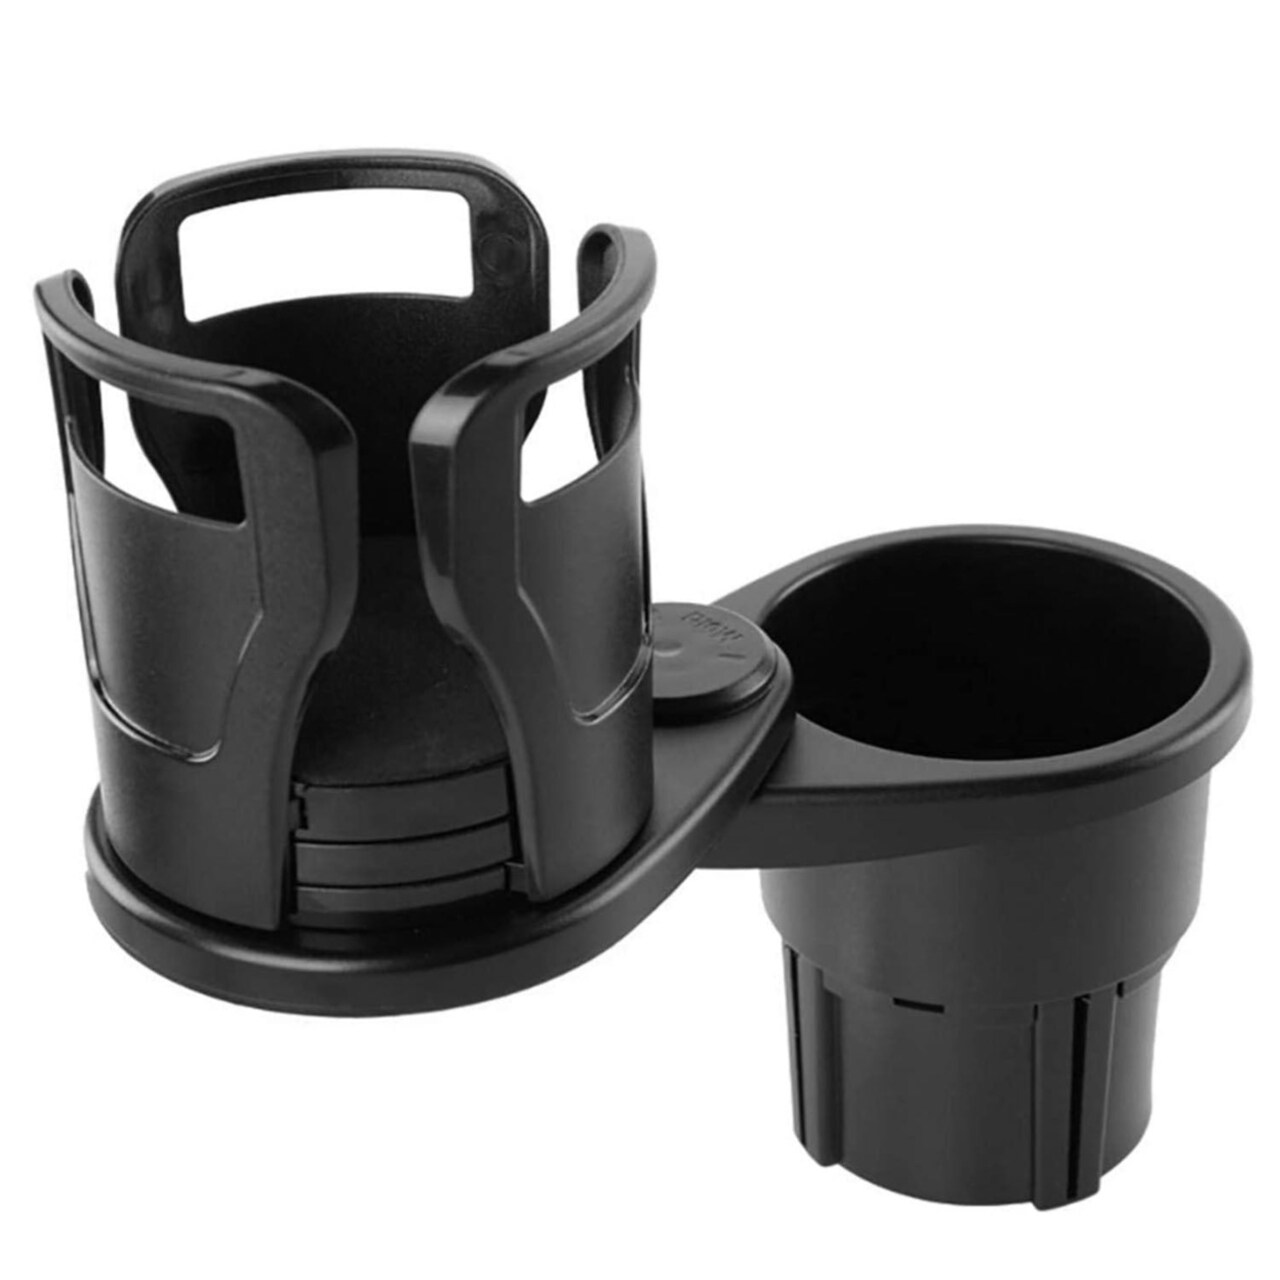 SKUSHOPS 2 In 1 Car Cup Holder Extender Adapter 360 Rotating Dual Cup Mount  Organizer Holder For Most 20 oz Up To 5.9in Coffee